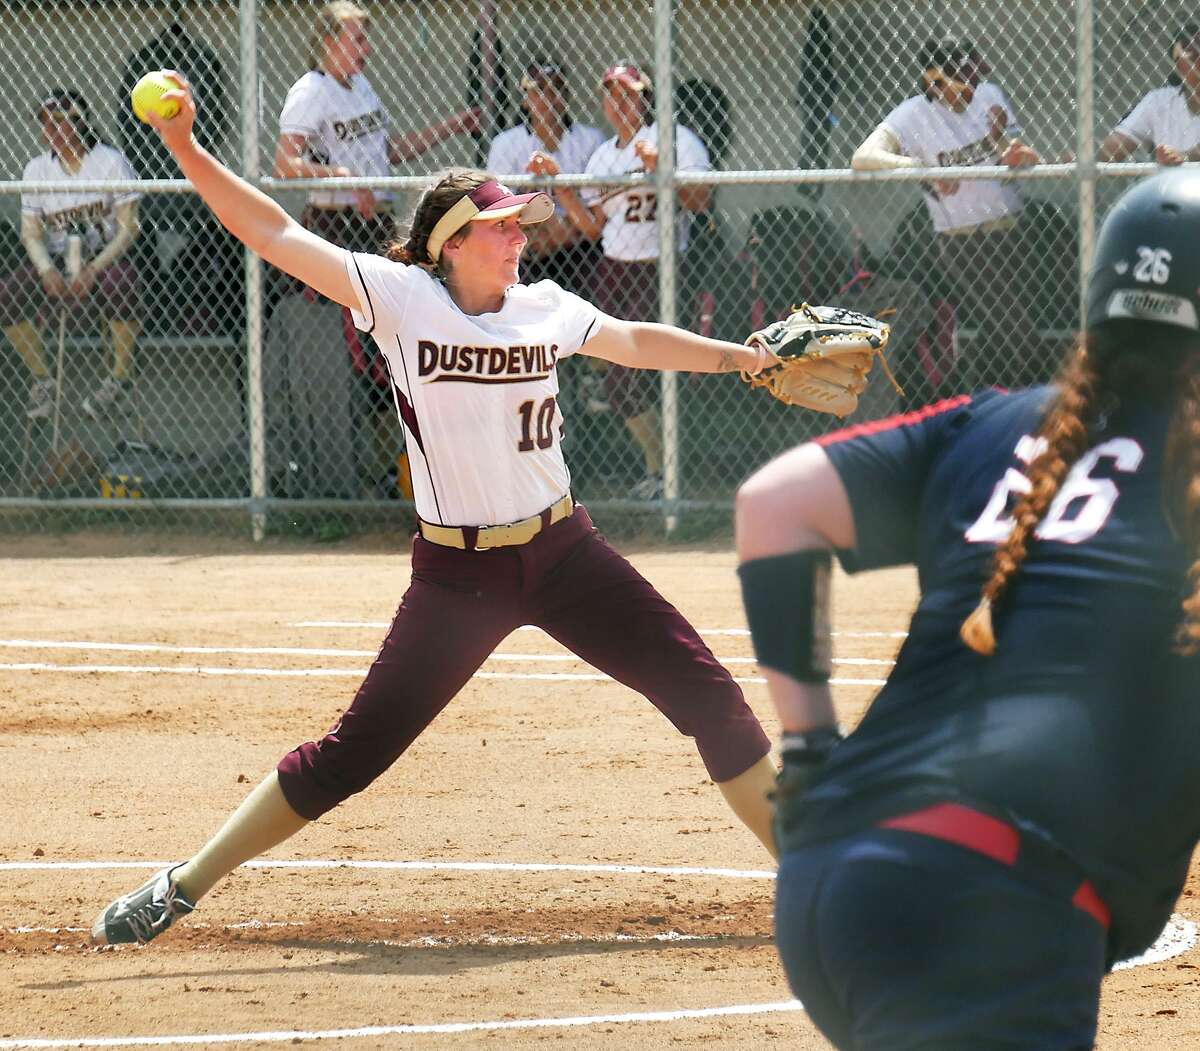 TAMIU (21-28) will kick off its doubleheader with the No. 9 Rambelles on Monday at 12 p.m.